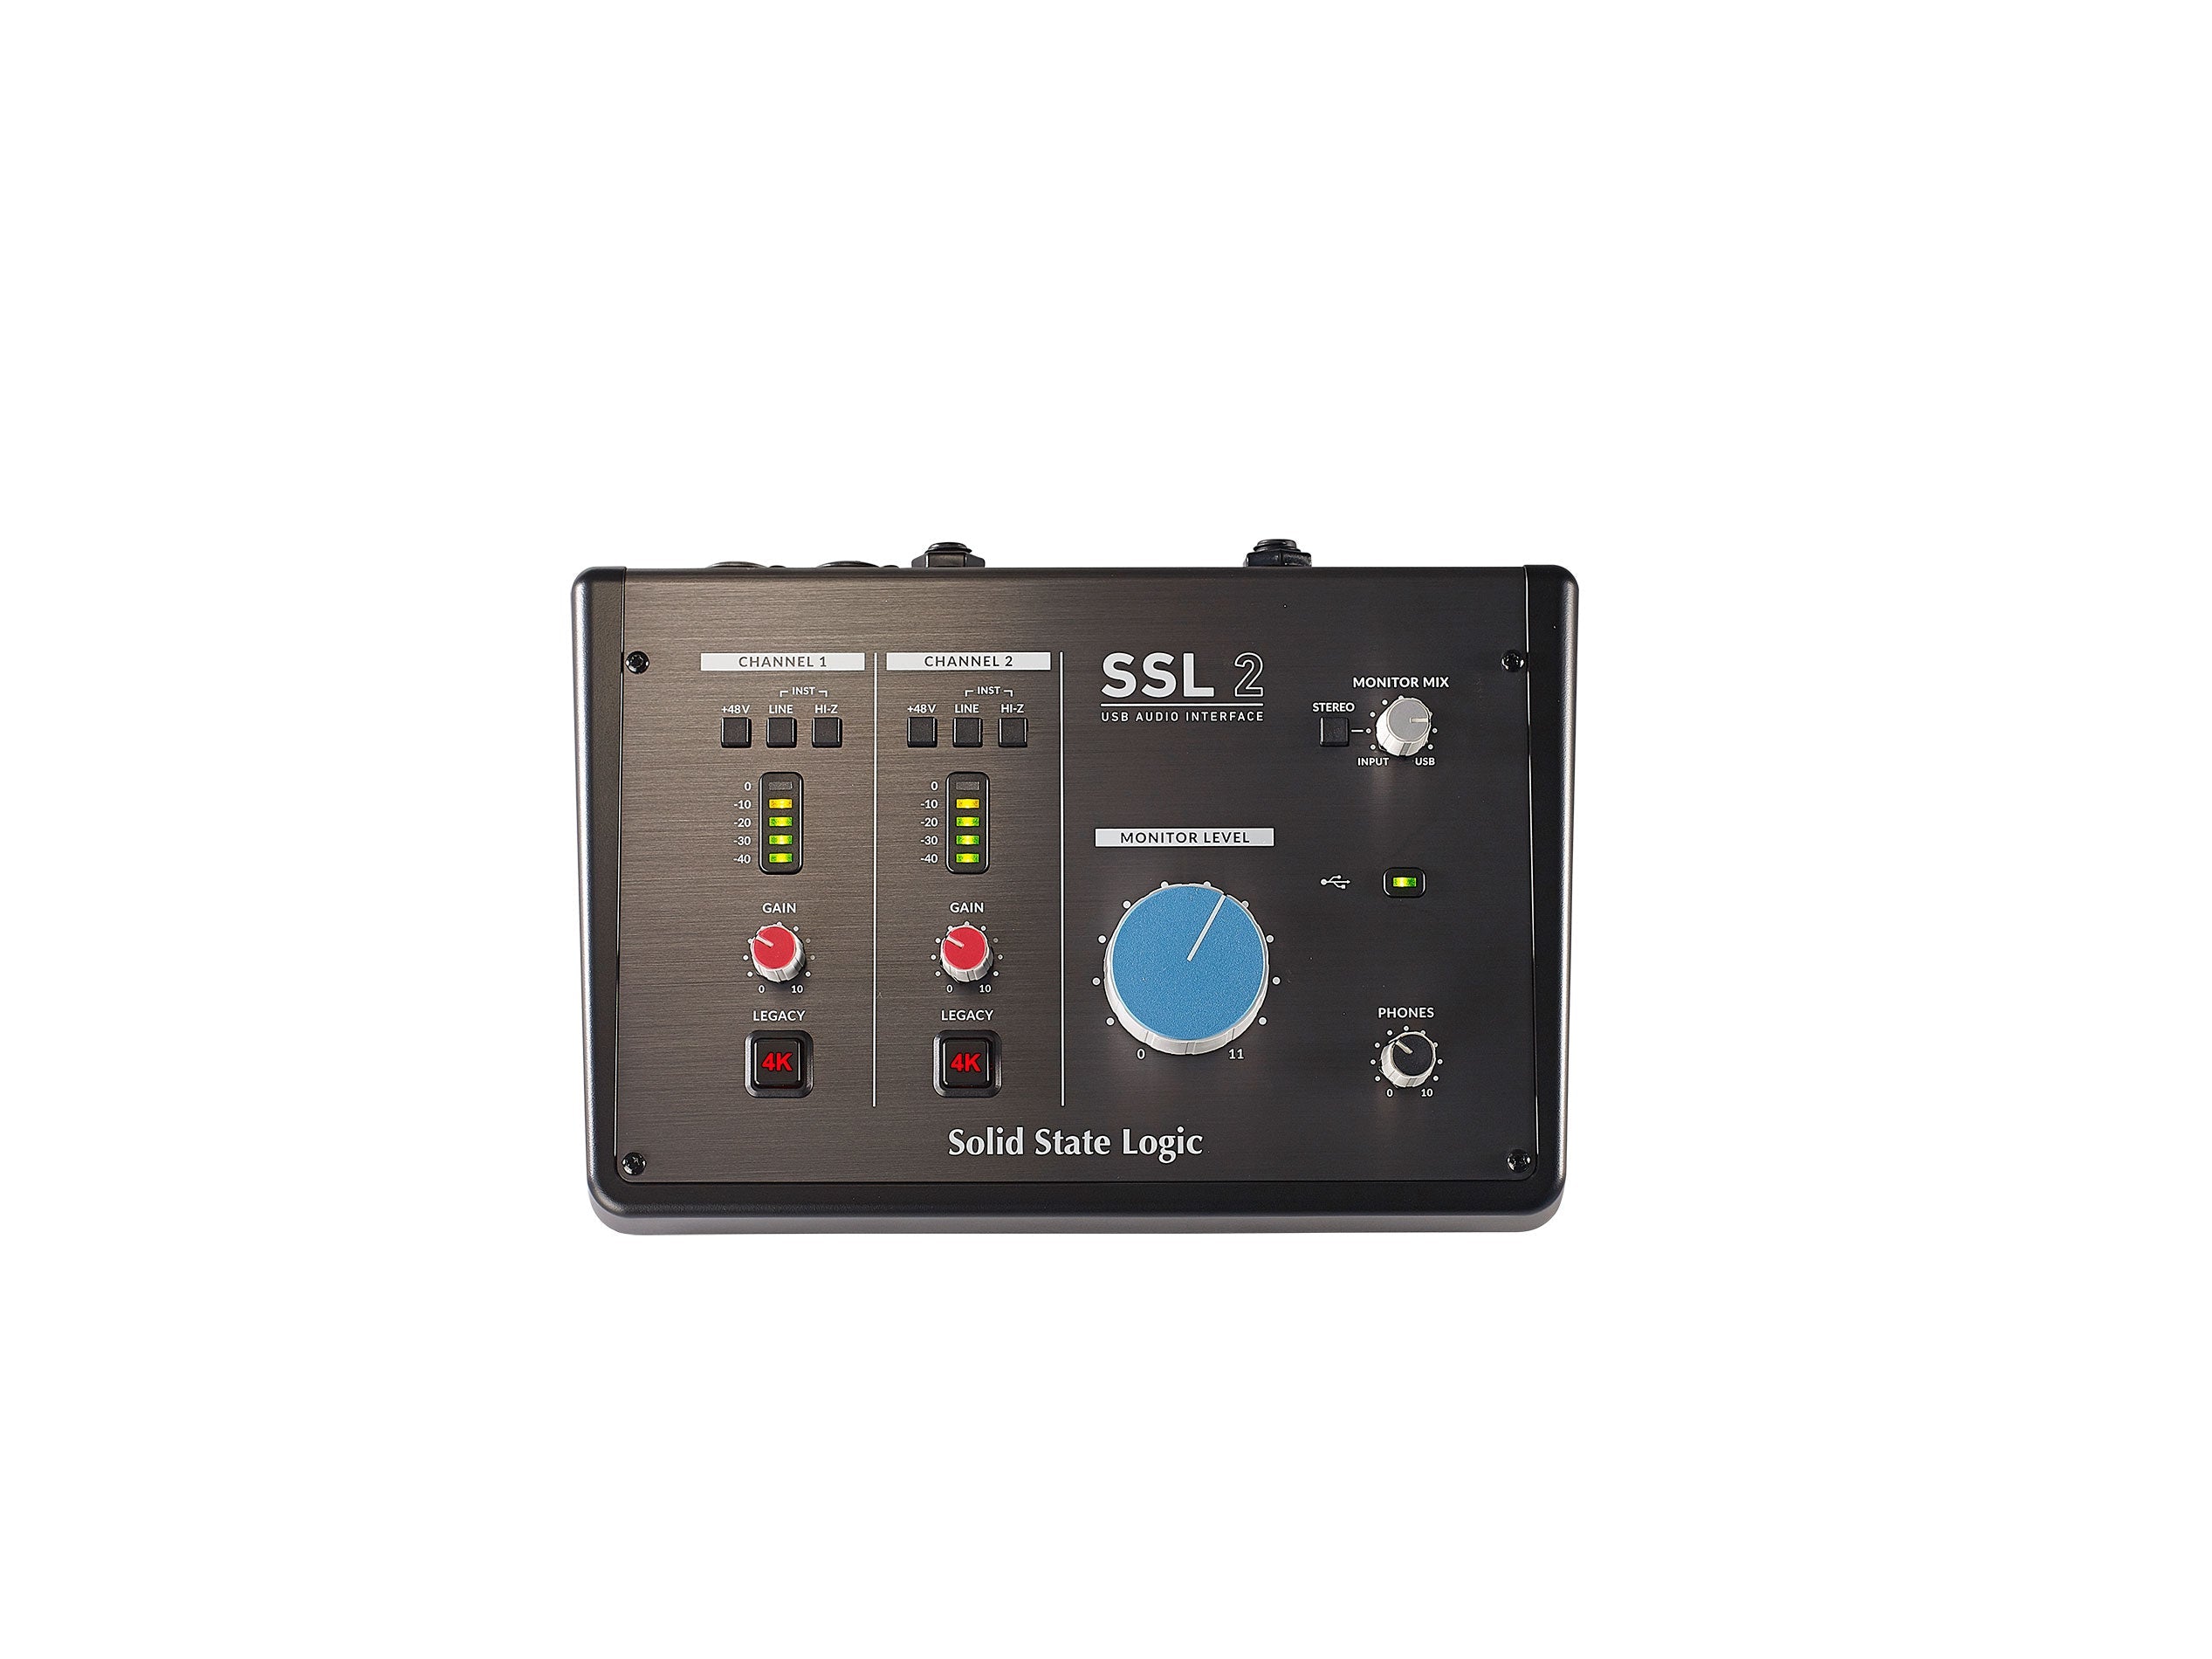 Solid State Logic SSL 2 Recording Pack